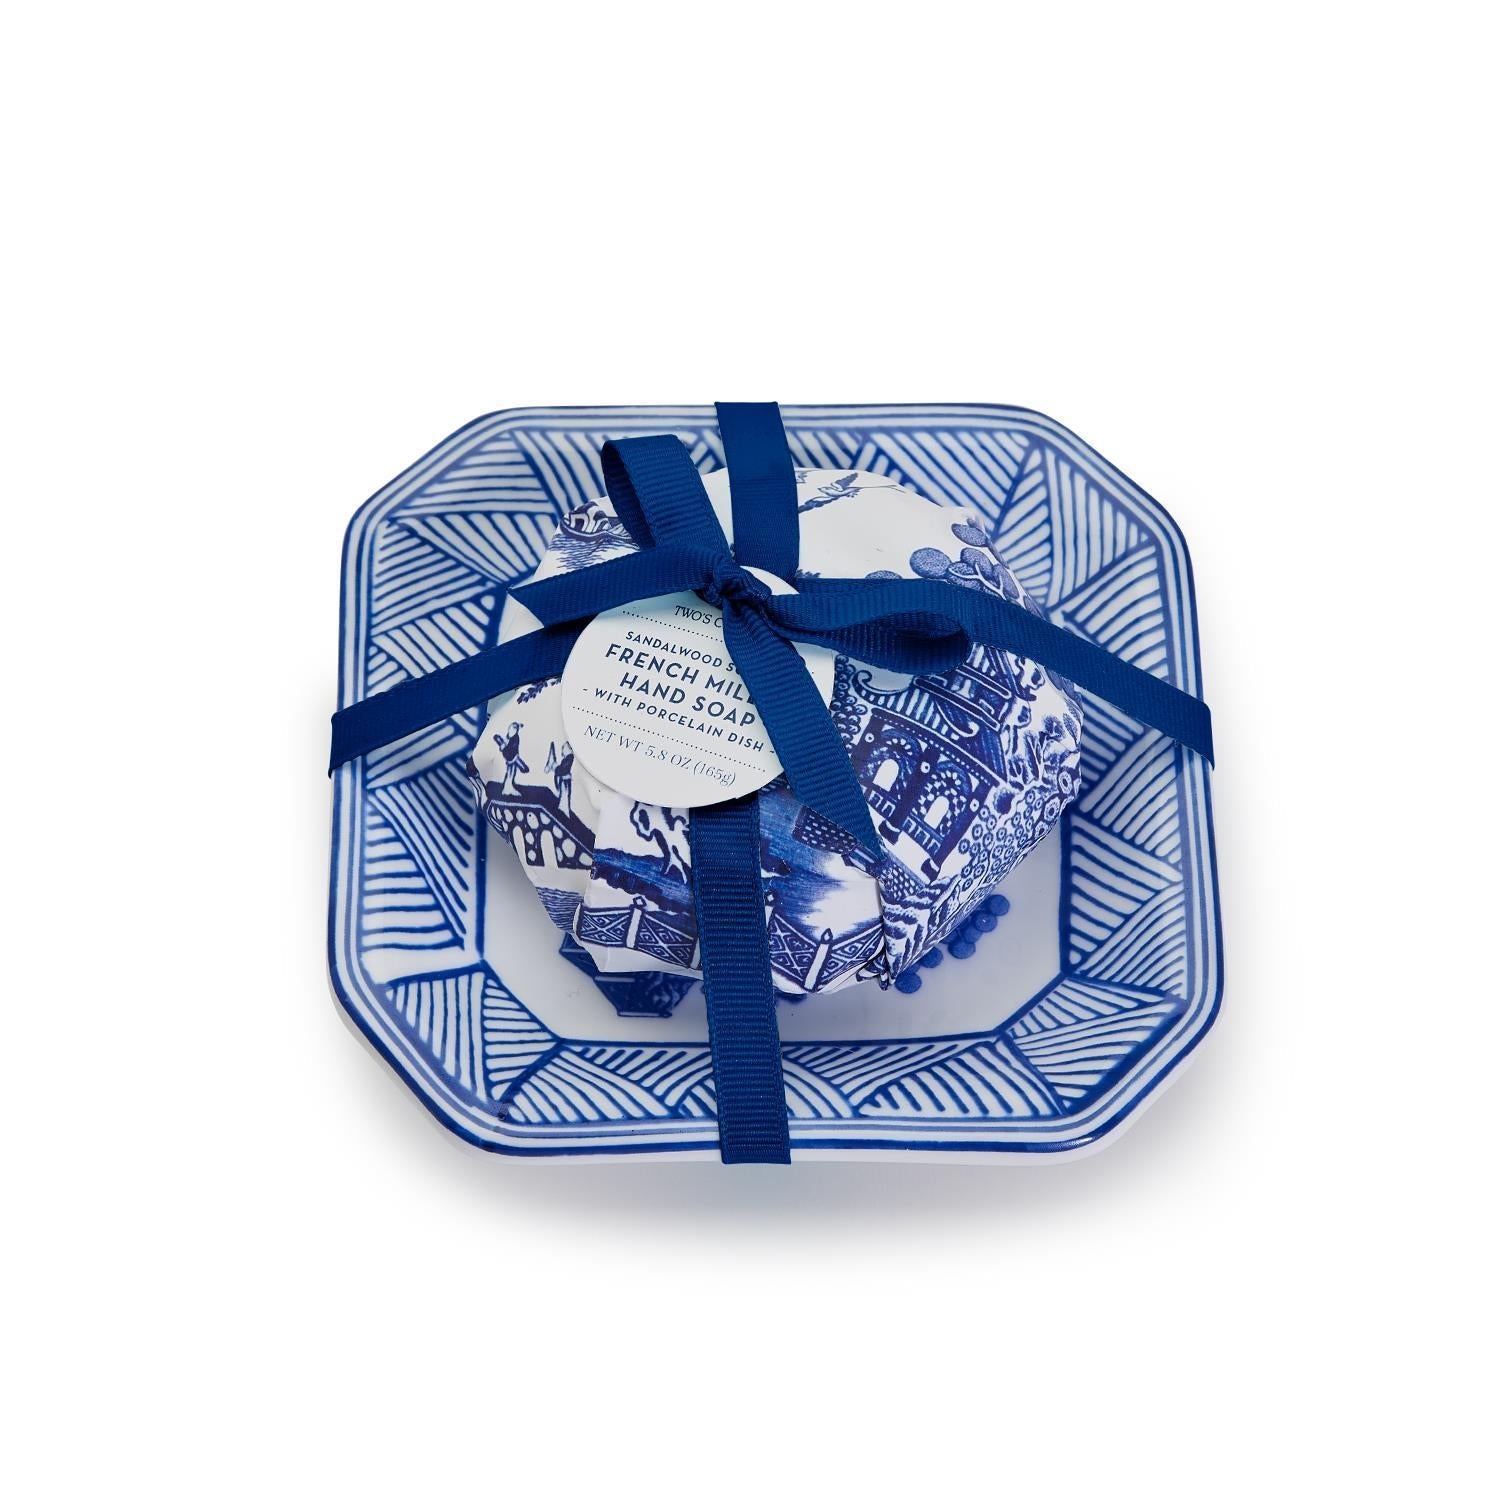 Blue Willow French Milled Soap with Porcelain Tray - Gaines Jewelers